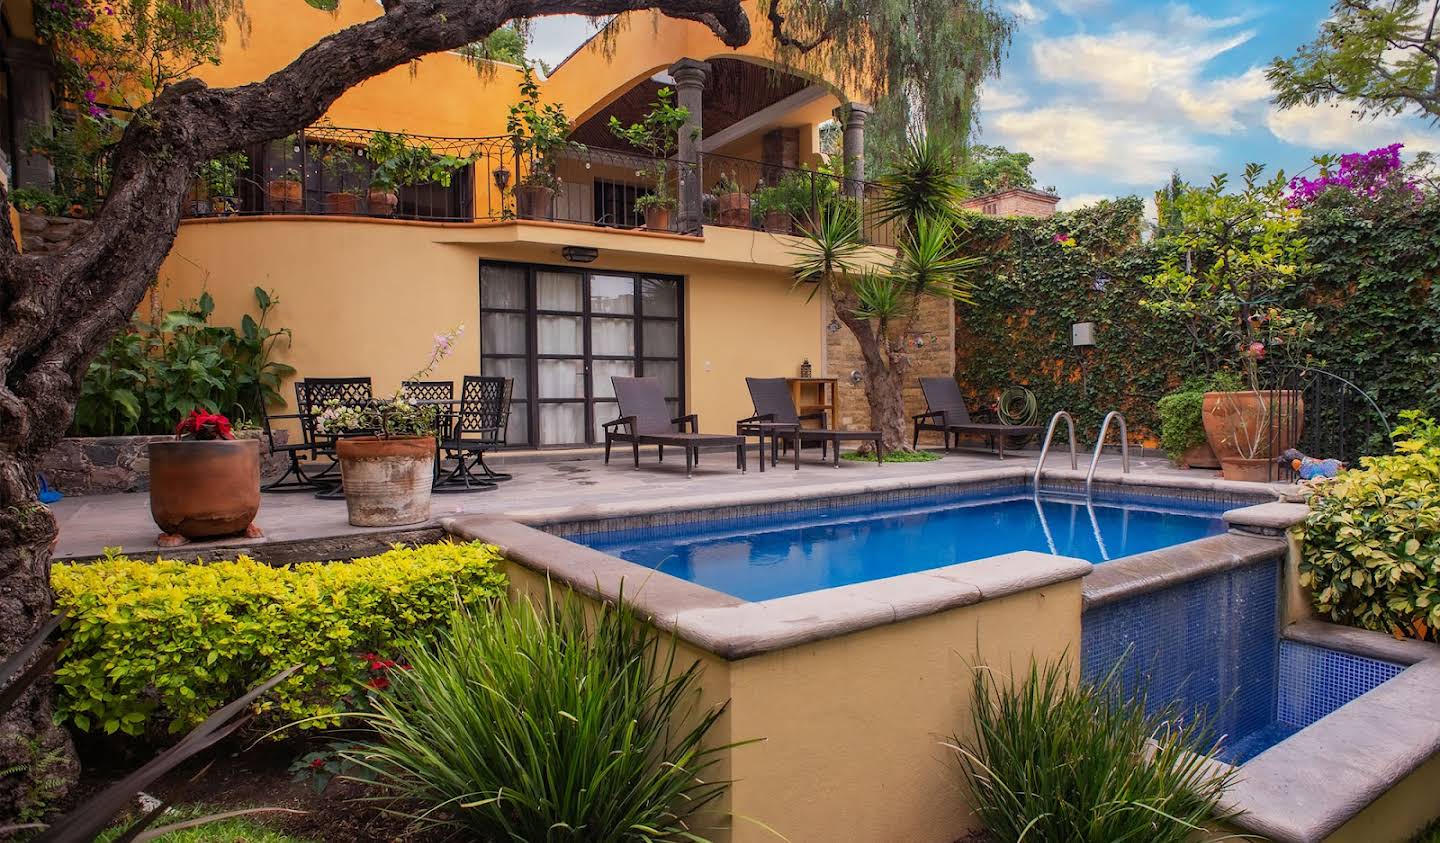 House with pool and garden San Miguel de Allende